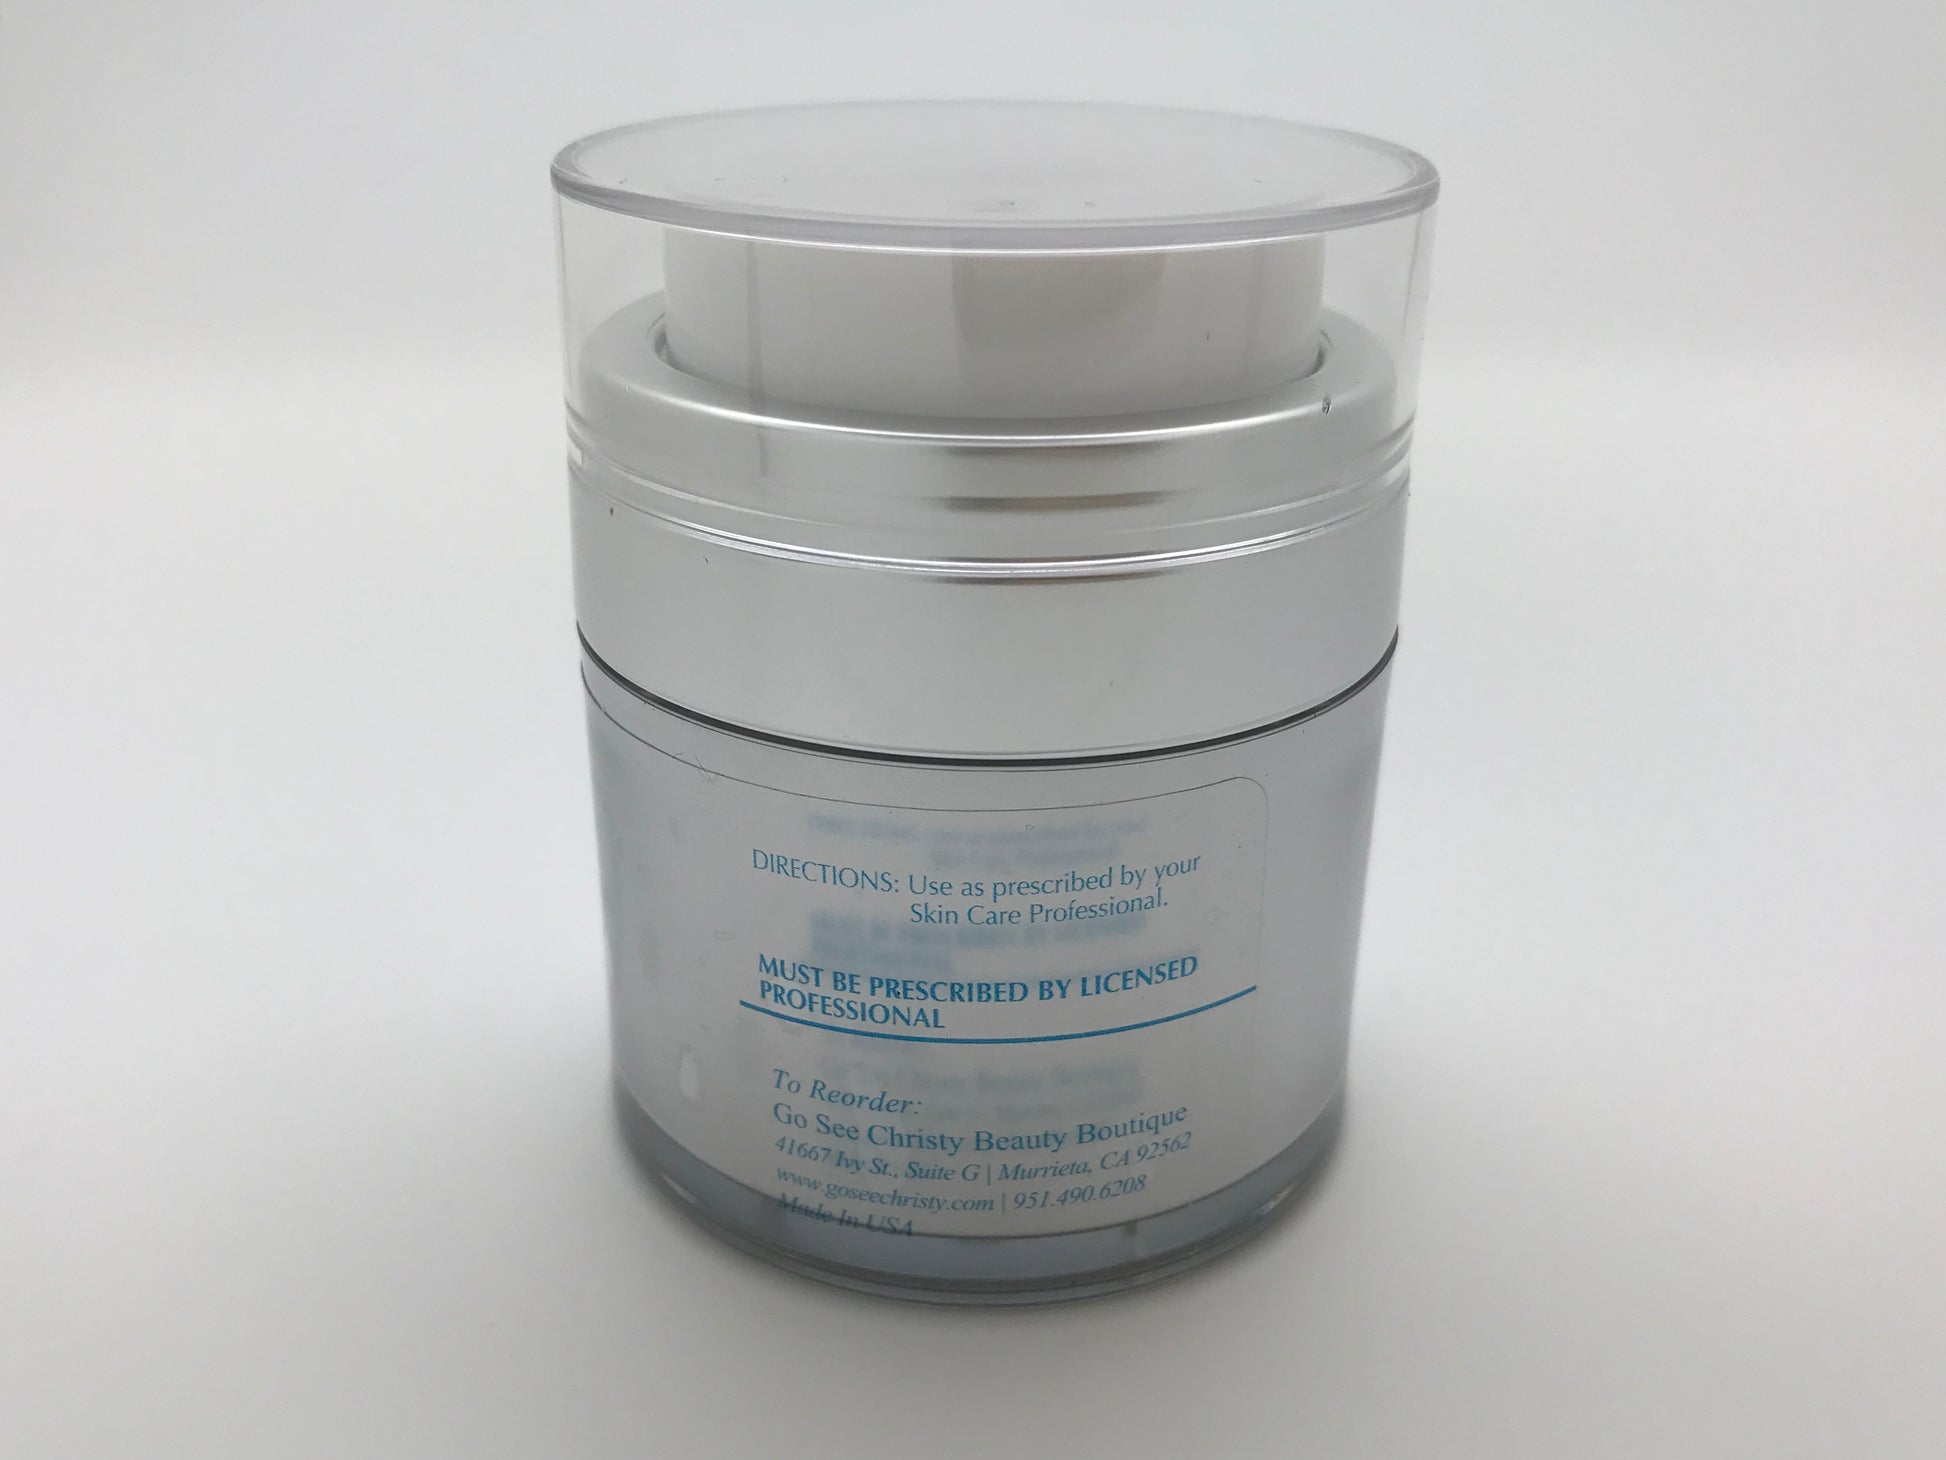 MD Dermaceutical-Overnight Repair Cream - Go See Christy Beauty 